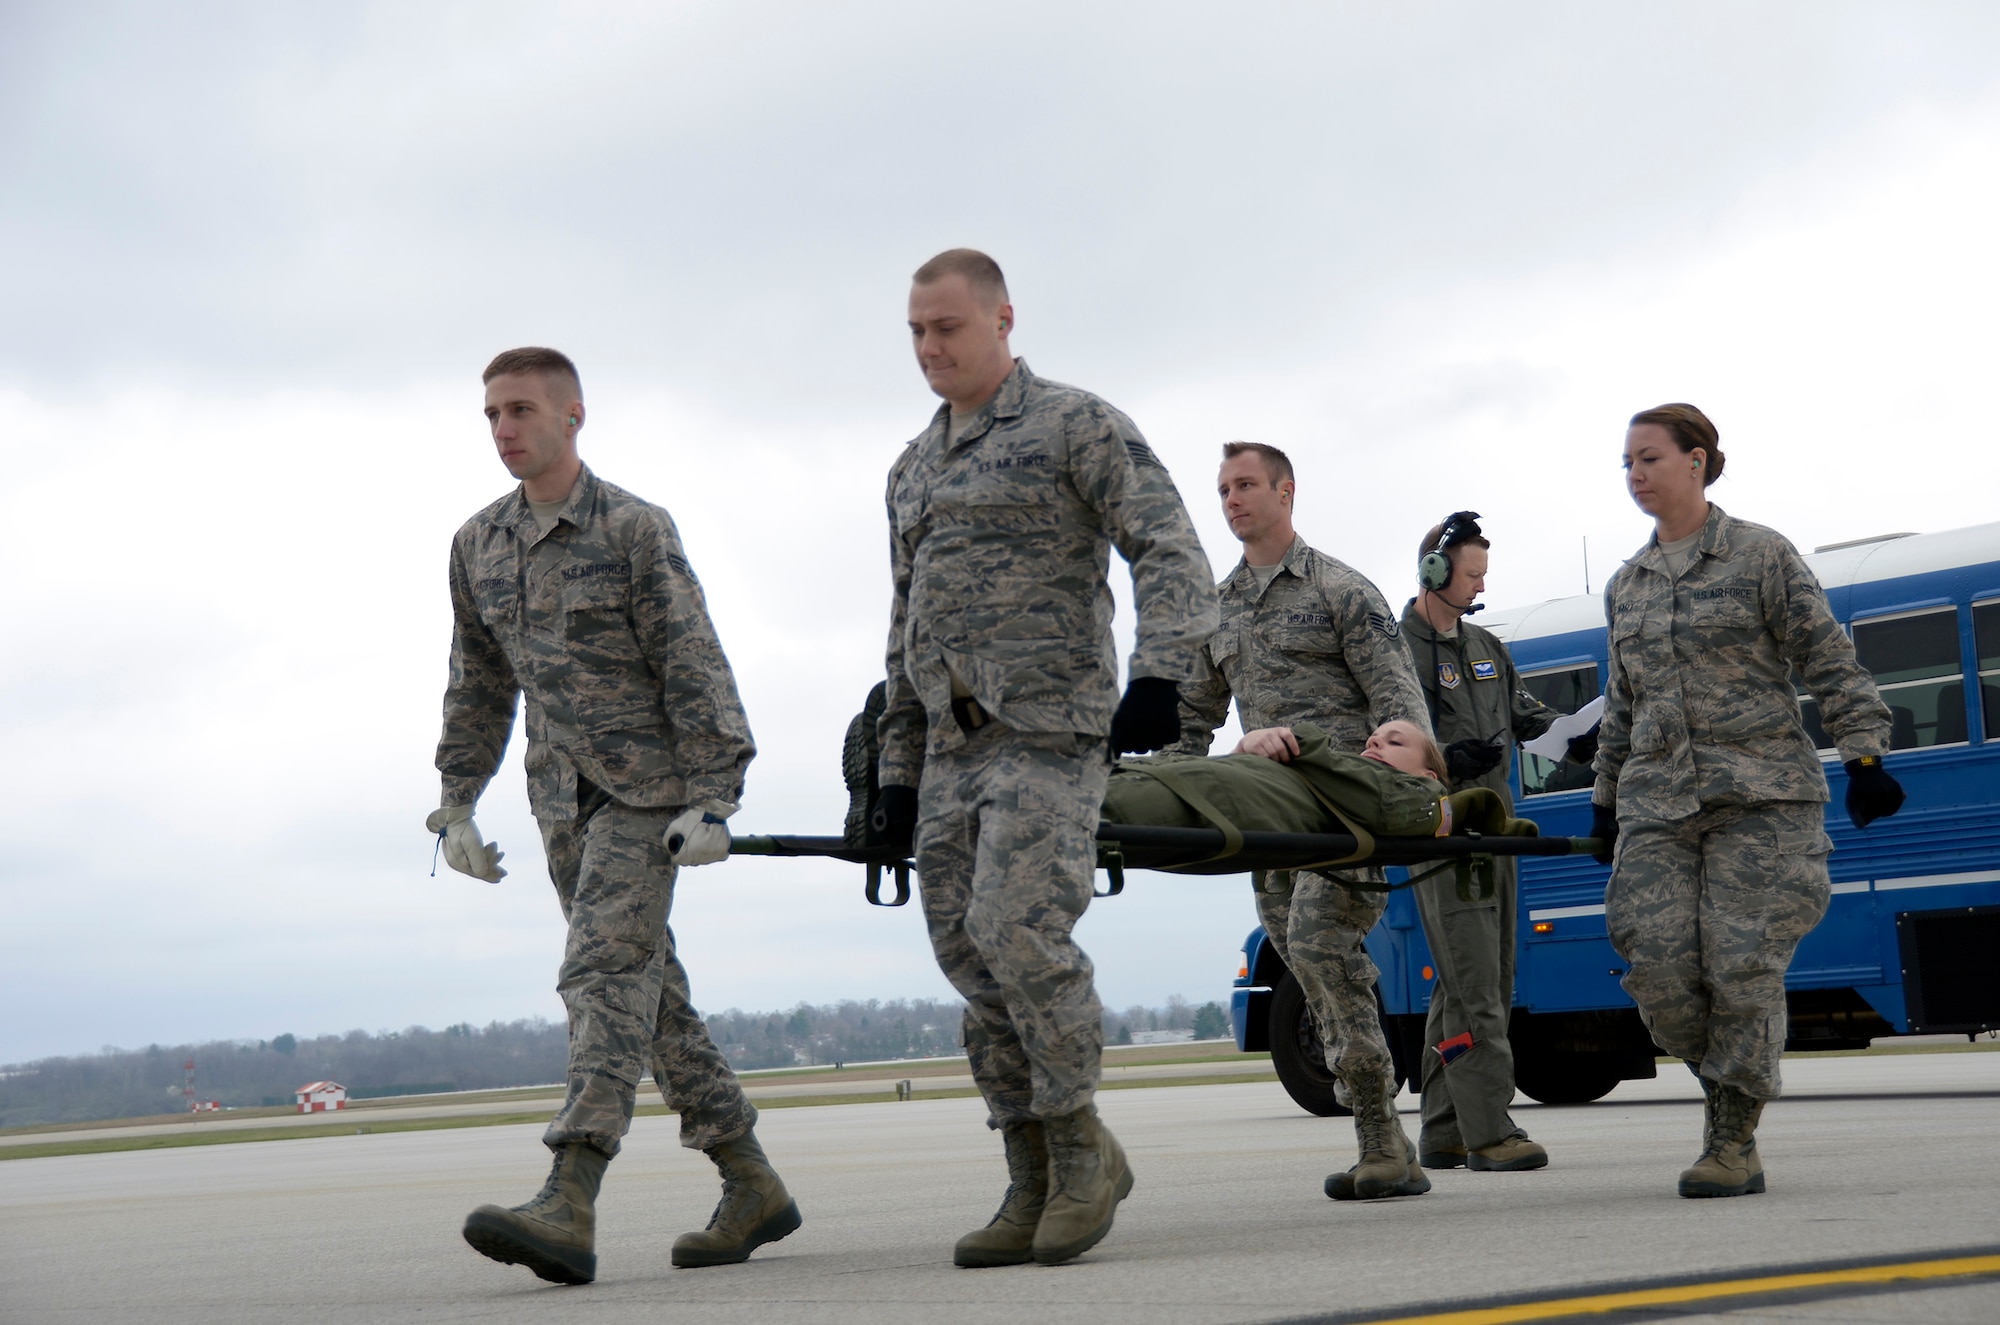 445th Aeromedical Staging Squadron Airmen perform a four-person litter carry on the flightline April 1, 2017. The Airmen carried a “patient” from a bus to a 445th Airlift Wing C-17 Globemaster III as part of a home station exercise alongside Airmen from the 445th Aeromedical Evacuation Squadron. (U.S. Air Force photo/Staff Sgt. Joel McCullough)